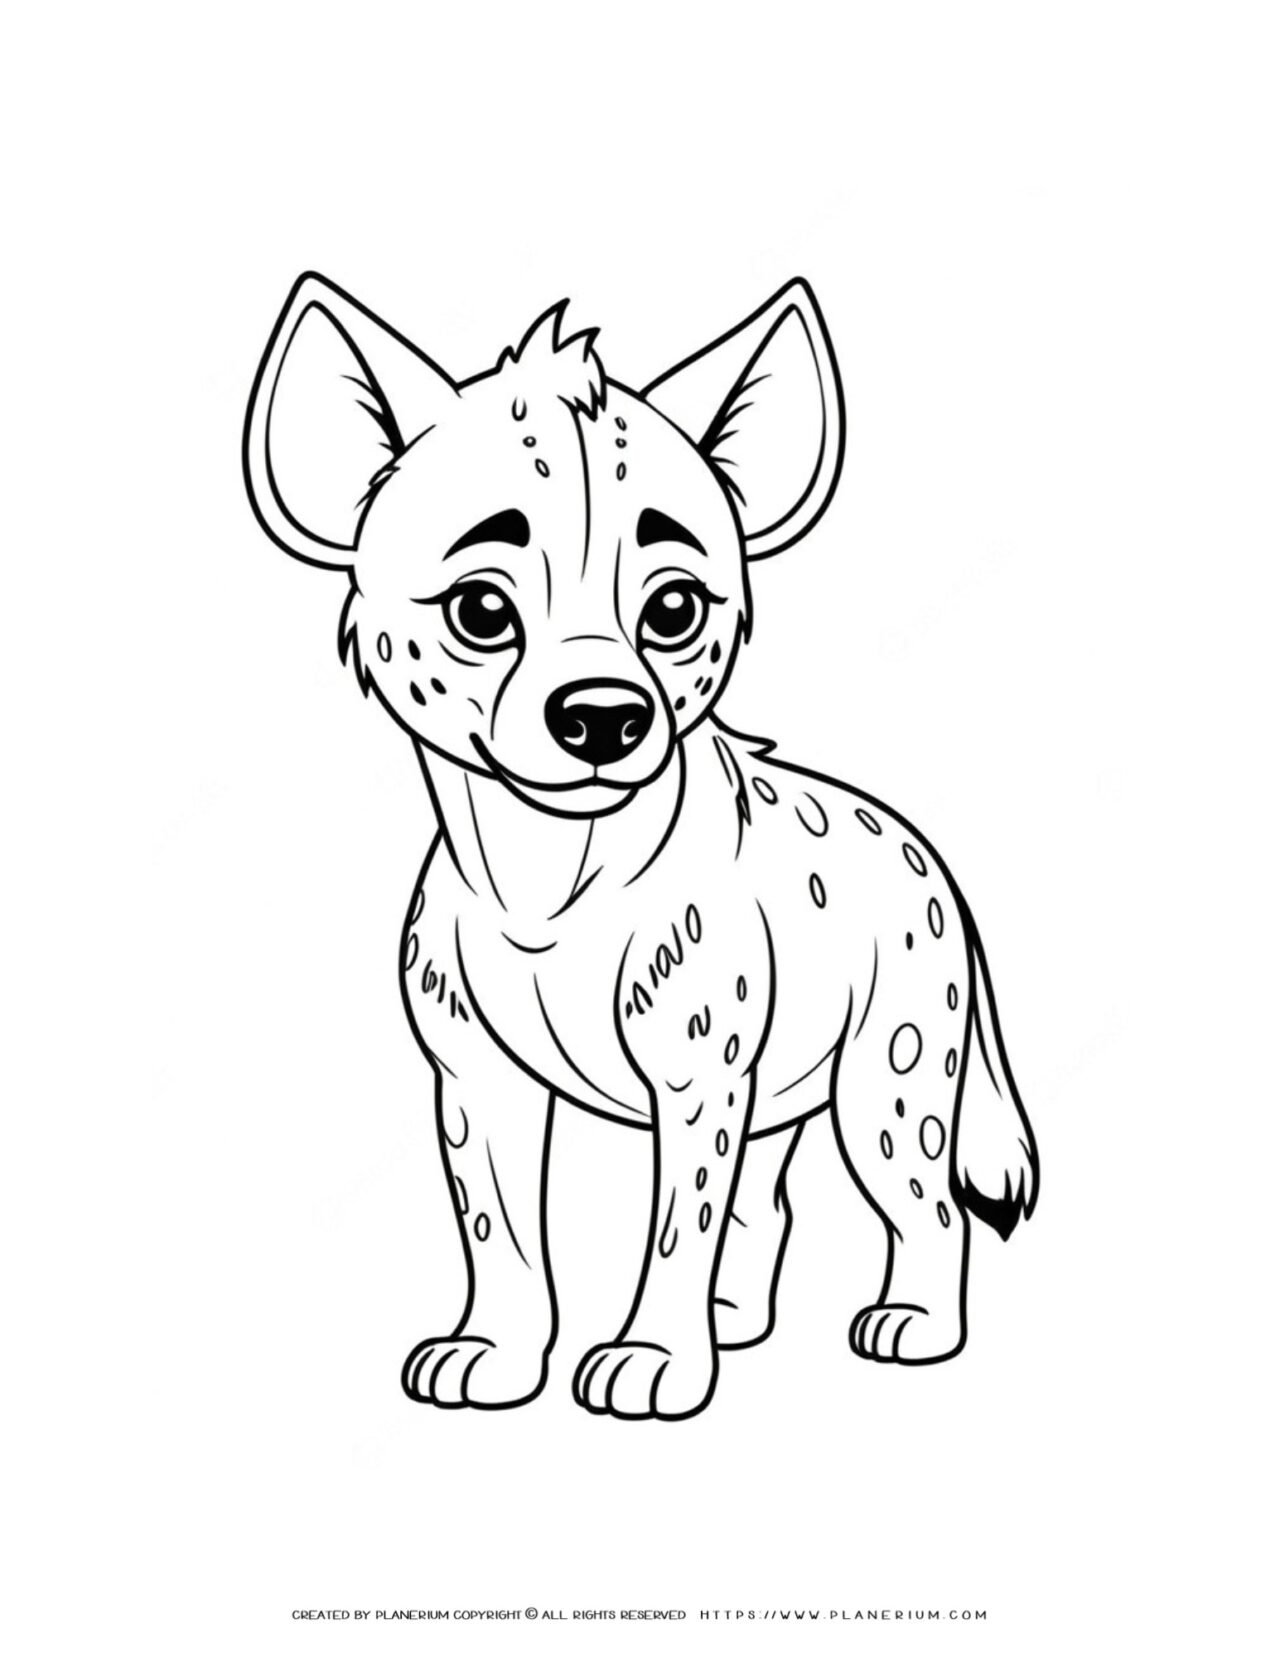 hyena-standing-coloring-page-for-kids